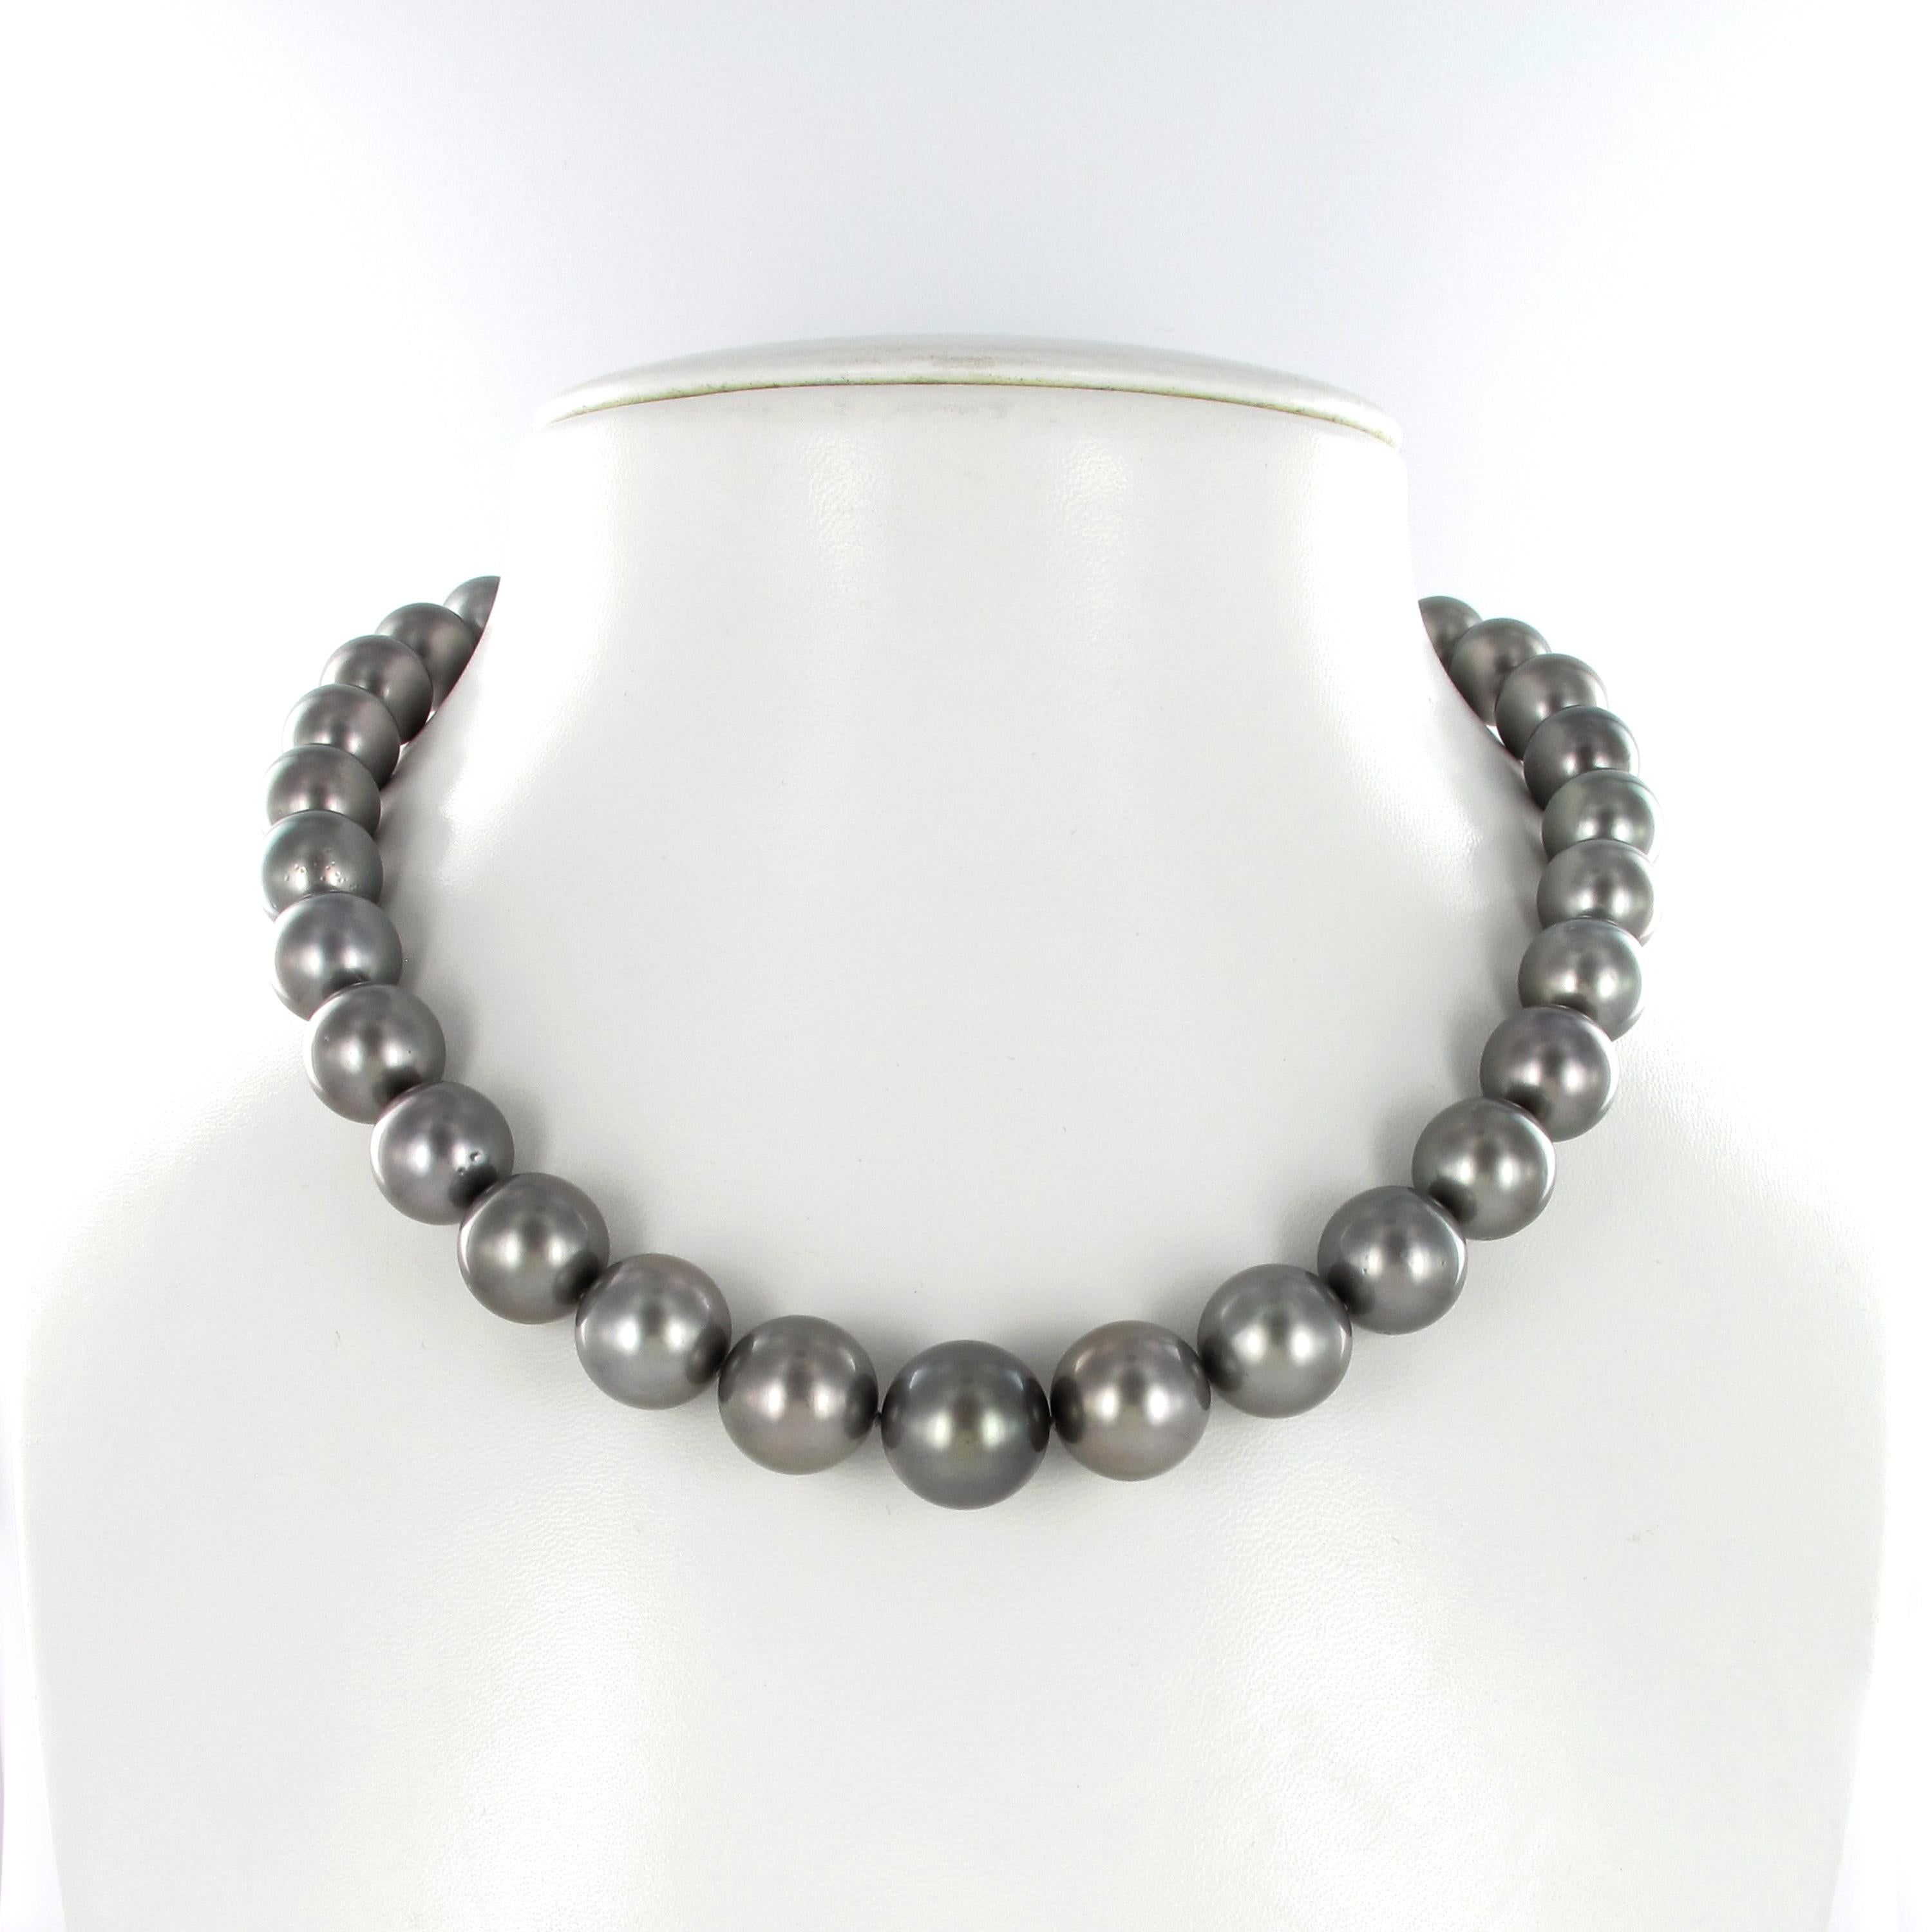 This strand consists of 33 round dark gray Tahitian cultured pearls graduating from 12.0 mm to 15.1 mm. The pearls are of round shapes, with a slightly spotted surface and a good luster. The ball clasp in 18 karat white and yellow gold is set with 6